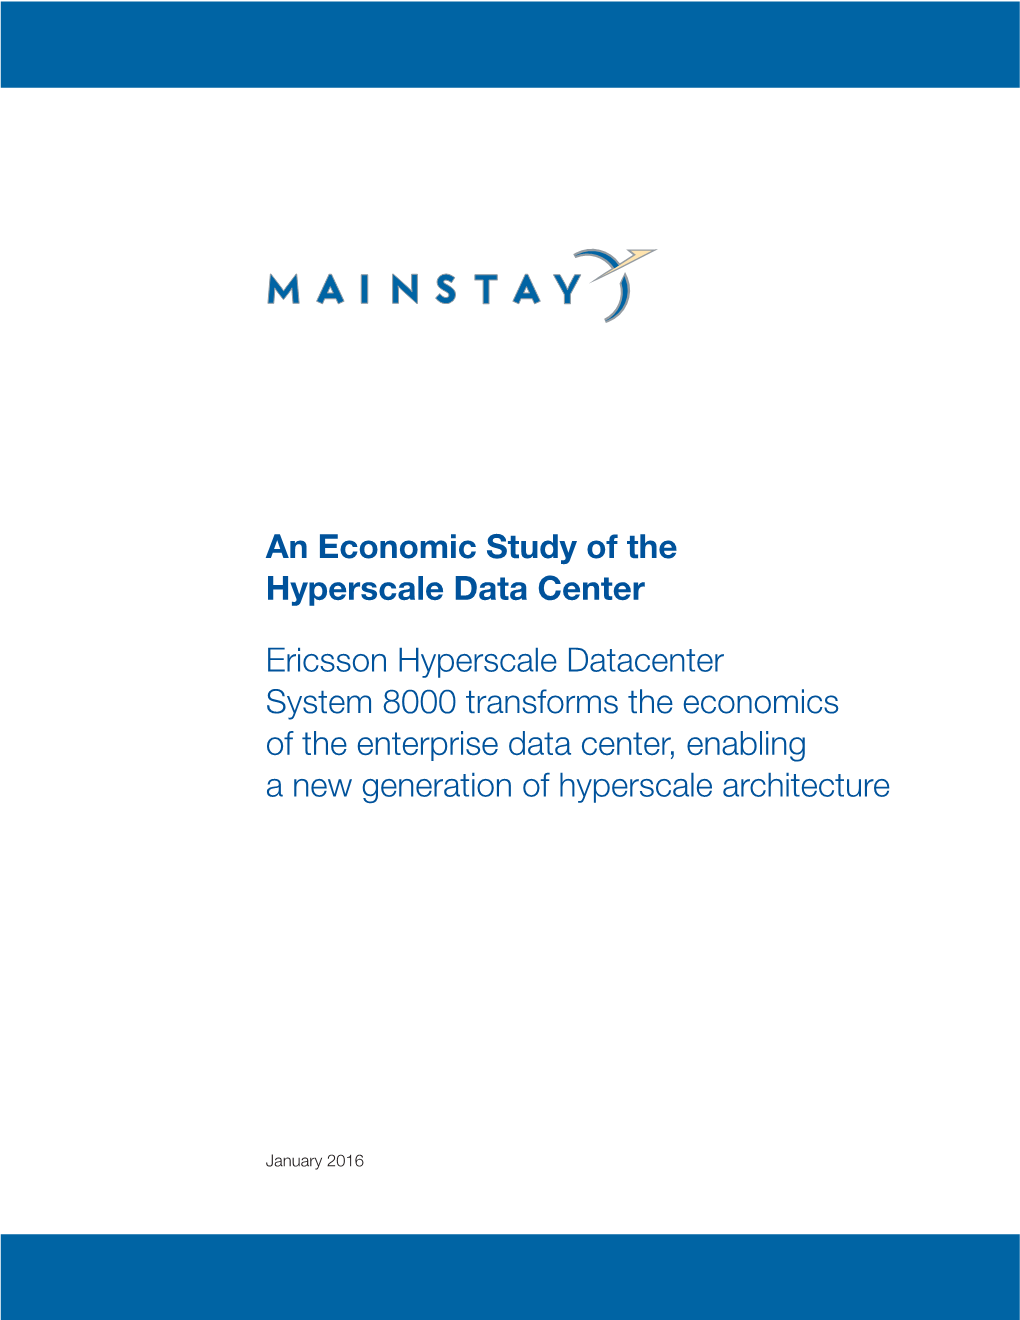 An Economic Study of the Hyperscale Data Center Ericsson Hyperscale Datacenter System 8000 Transforms the Economics of the Ente